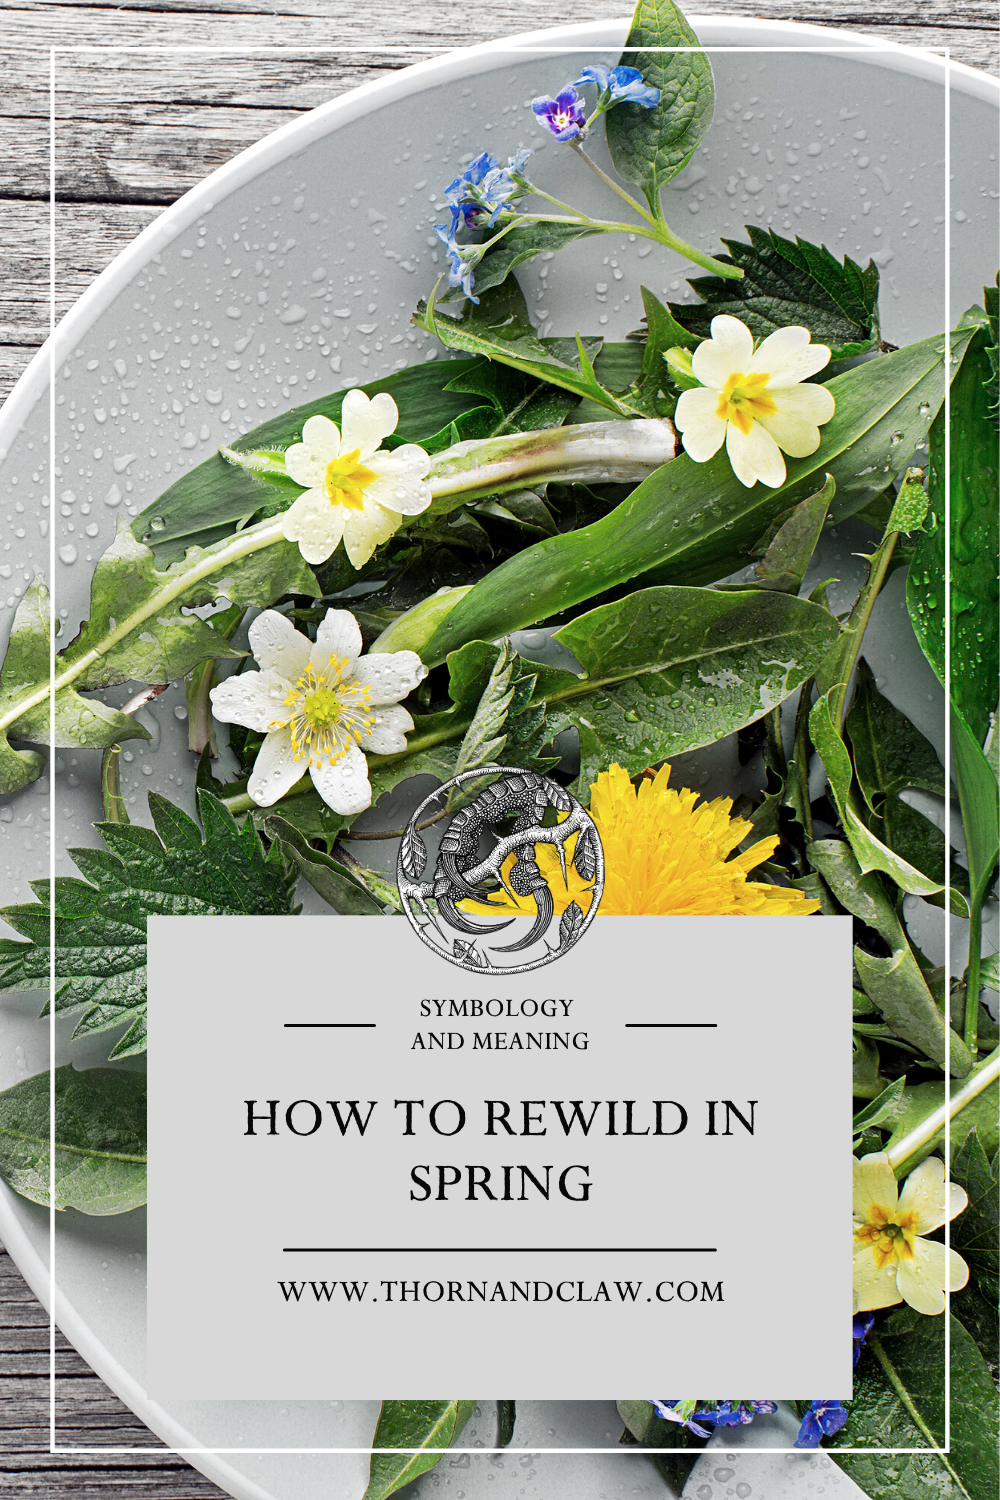 How to rewild in spring. Connect with nature in spring. 